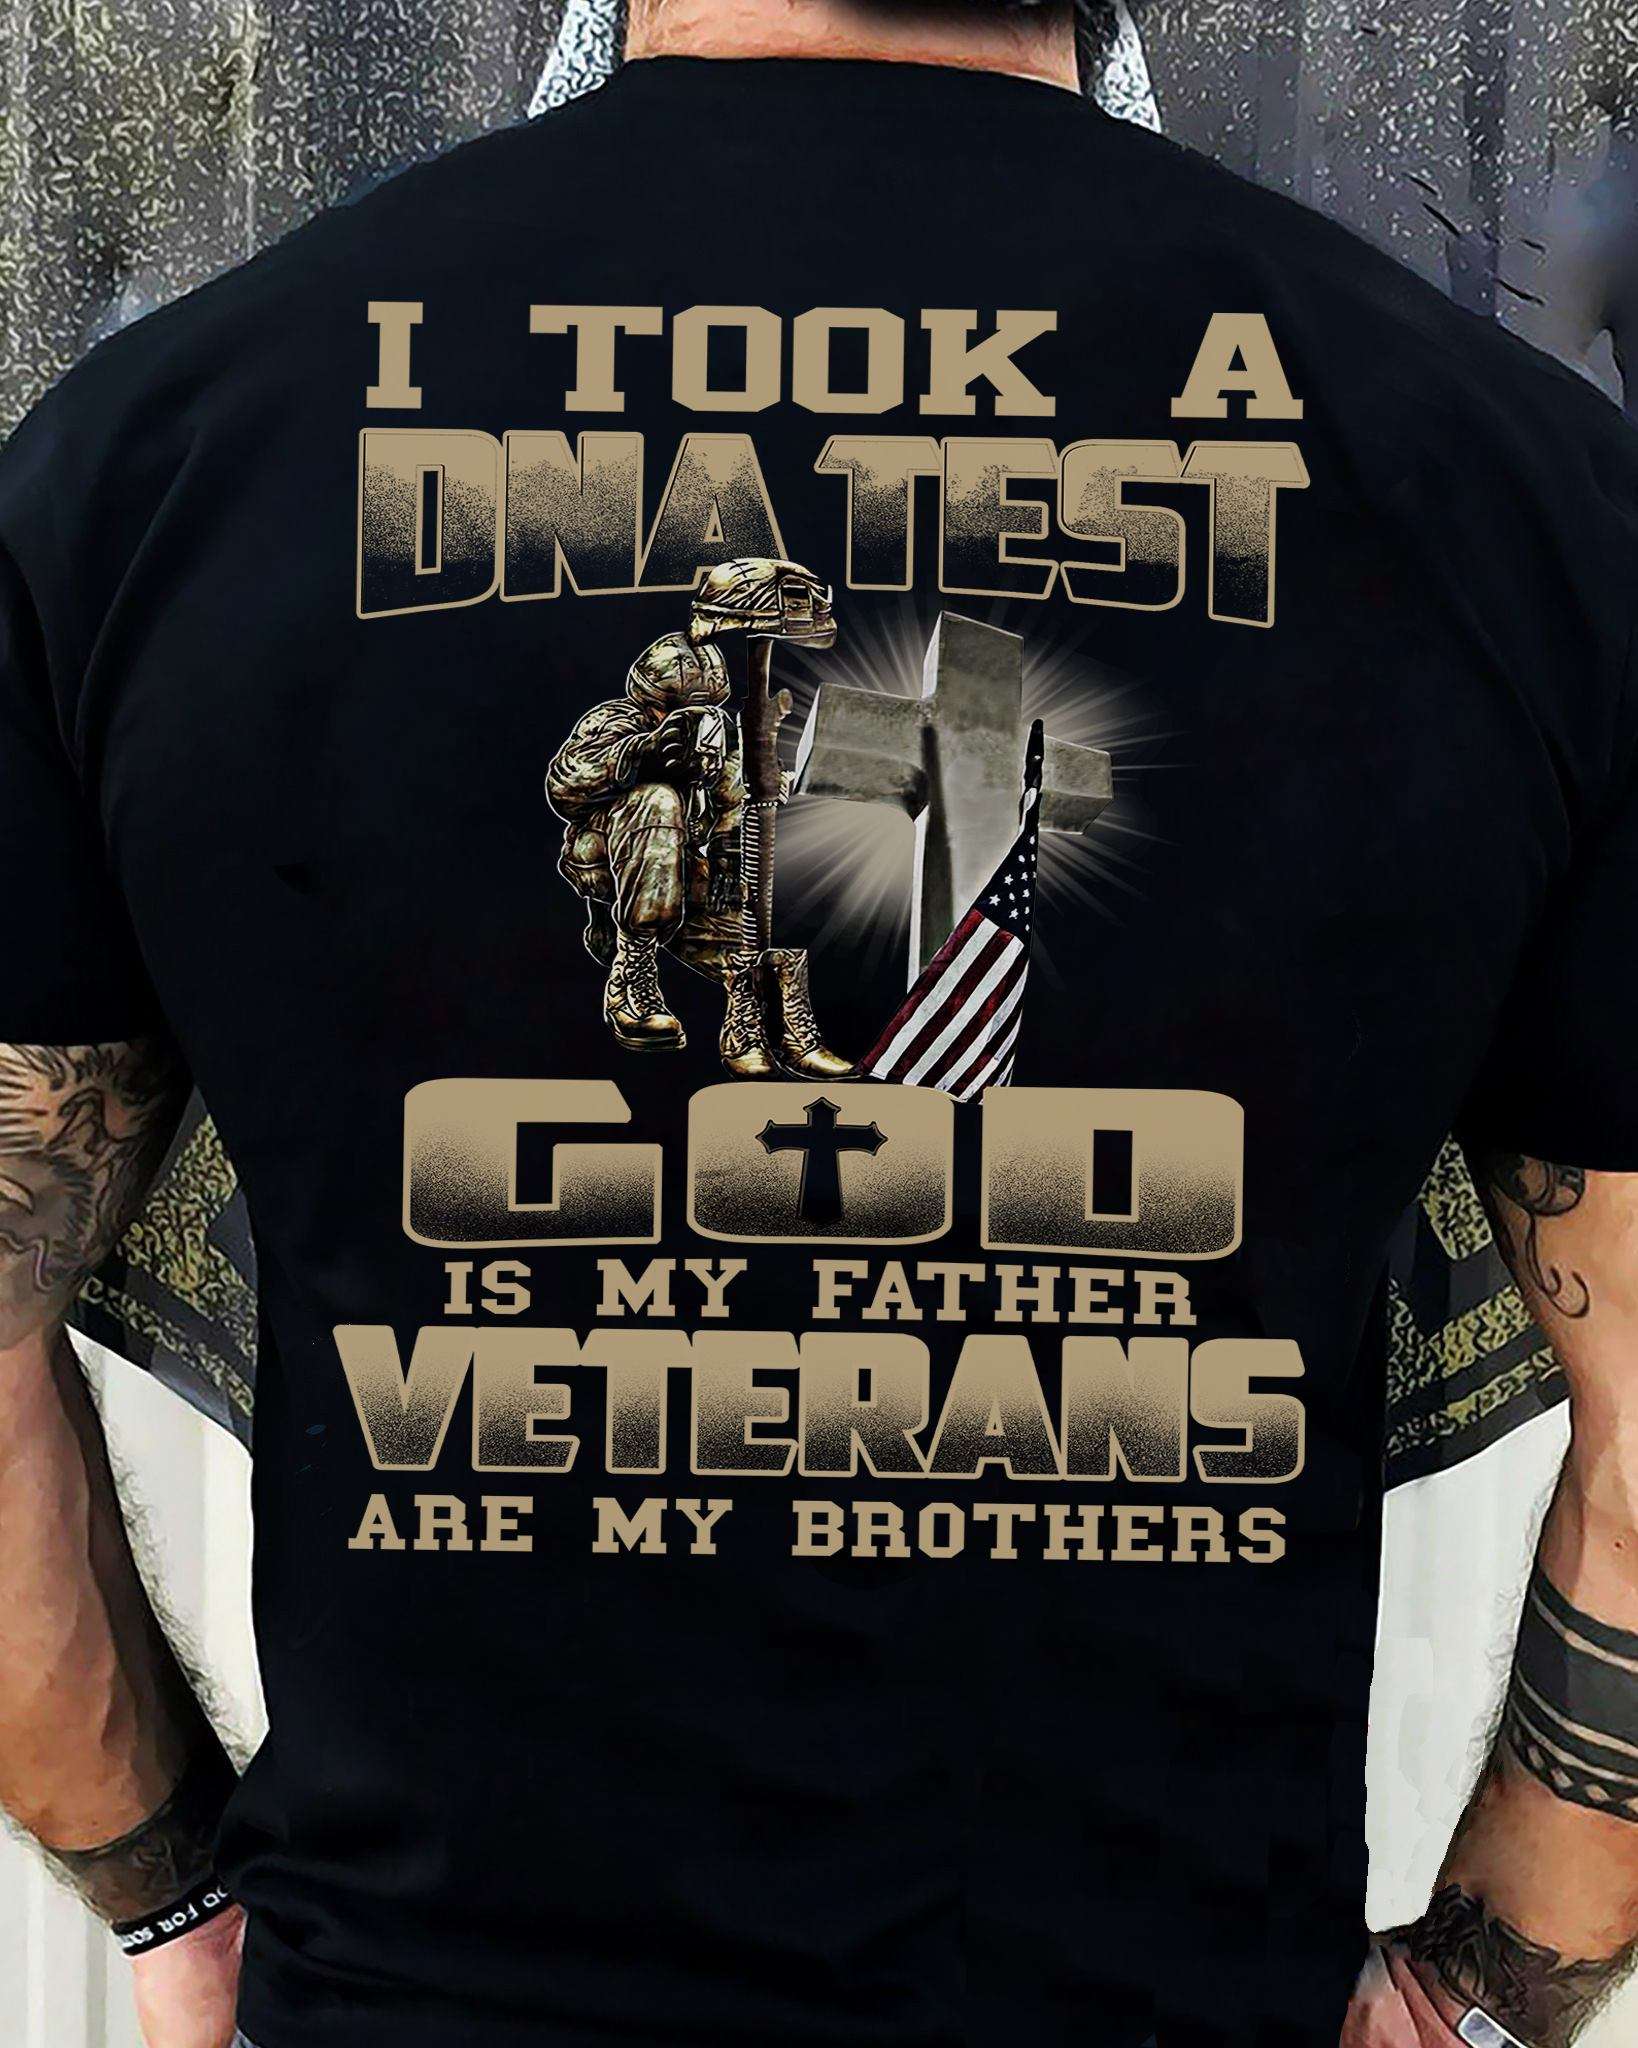 I took DNA test - God is my father, veterans are my brothers, US veterans